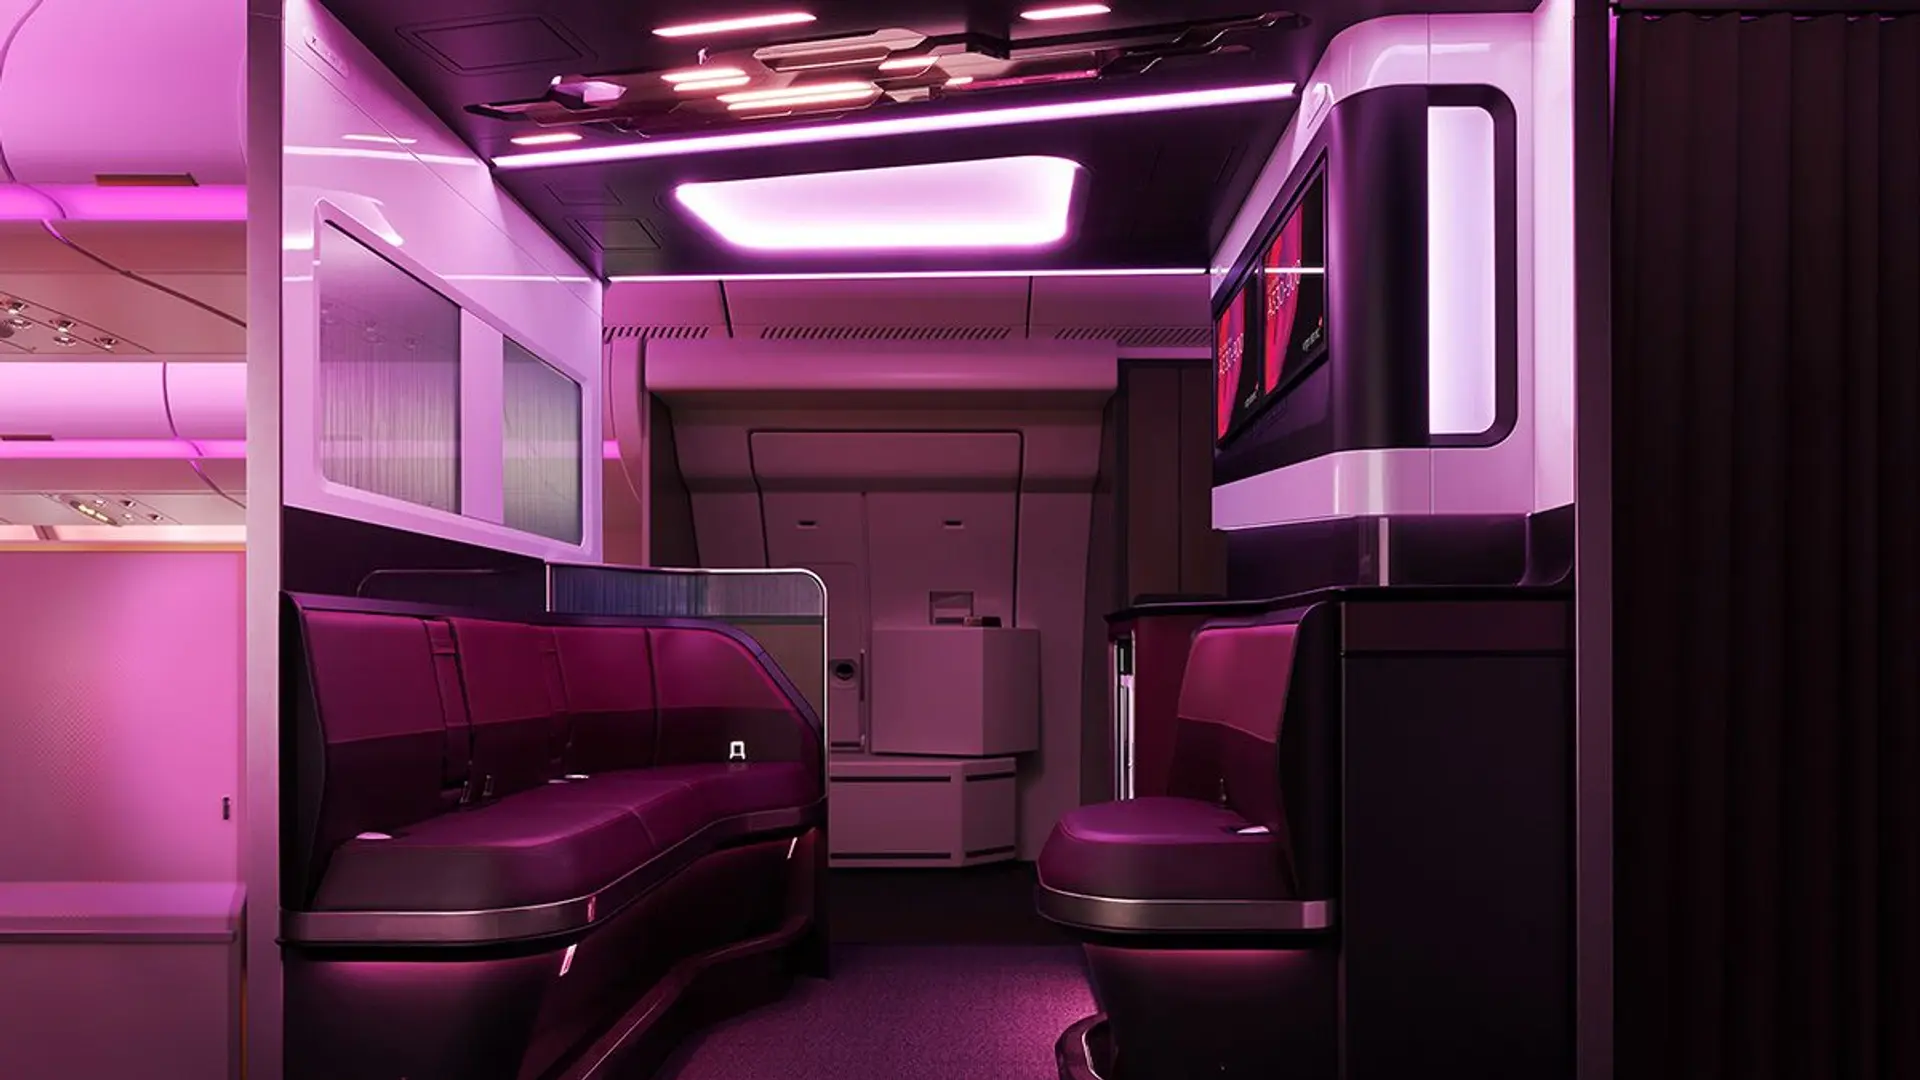 Airlines News - Virgin Atlantic unveils New Airbus A330neo fleet with stunning new Upper Class Retreat Suites